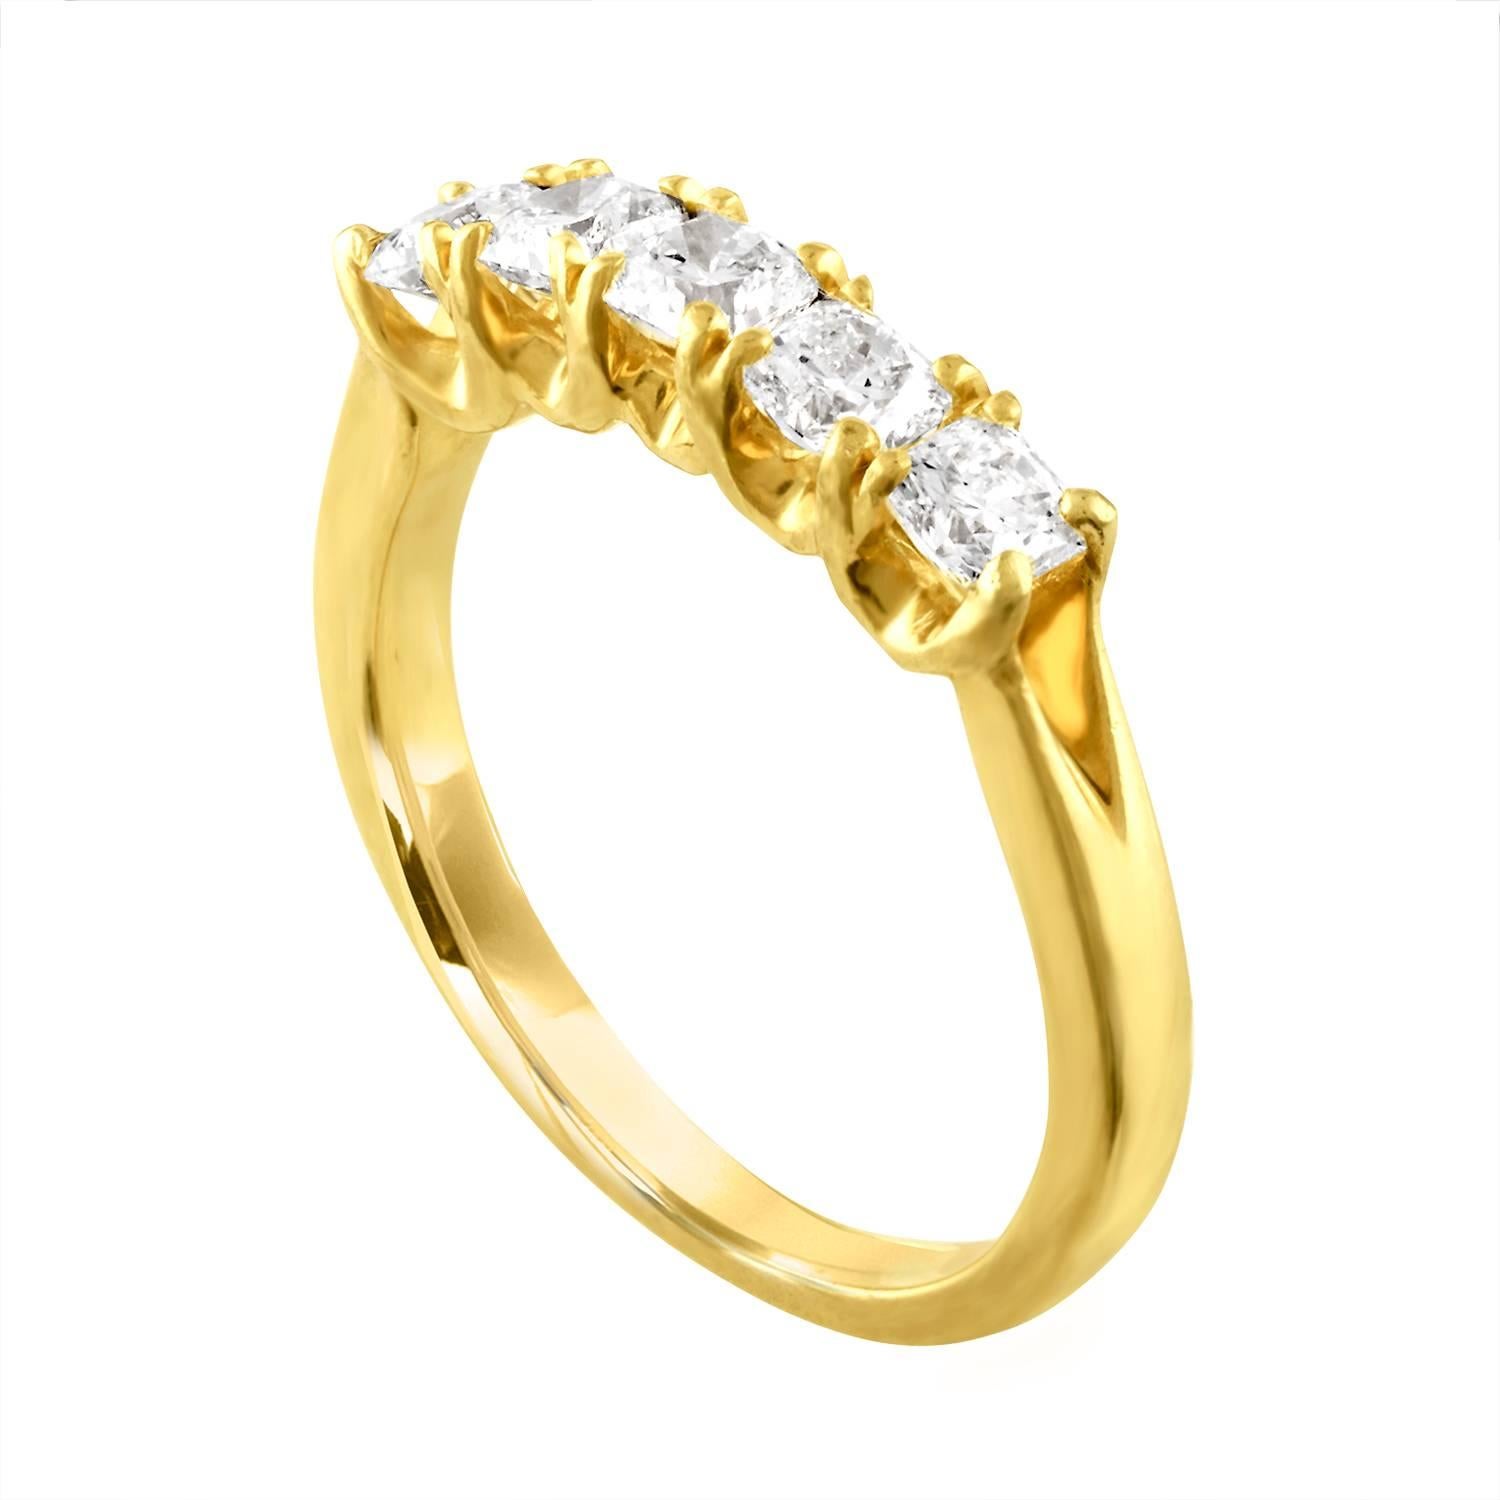 Beautiful Five Stone Ring by Hearts On Fire
The ring is 18K Yellow Gold
There are 1.00 Carats In Diamonds E/F VVS
The diamonds are Dream Cut exclusive to this brand.
The ring is a size 6.5, sizable.
The ring weighs 3.8 grams.
 